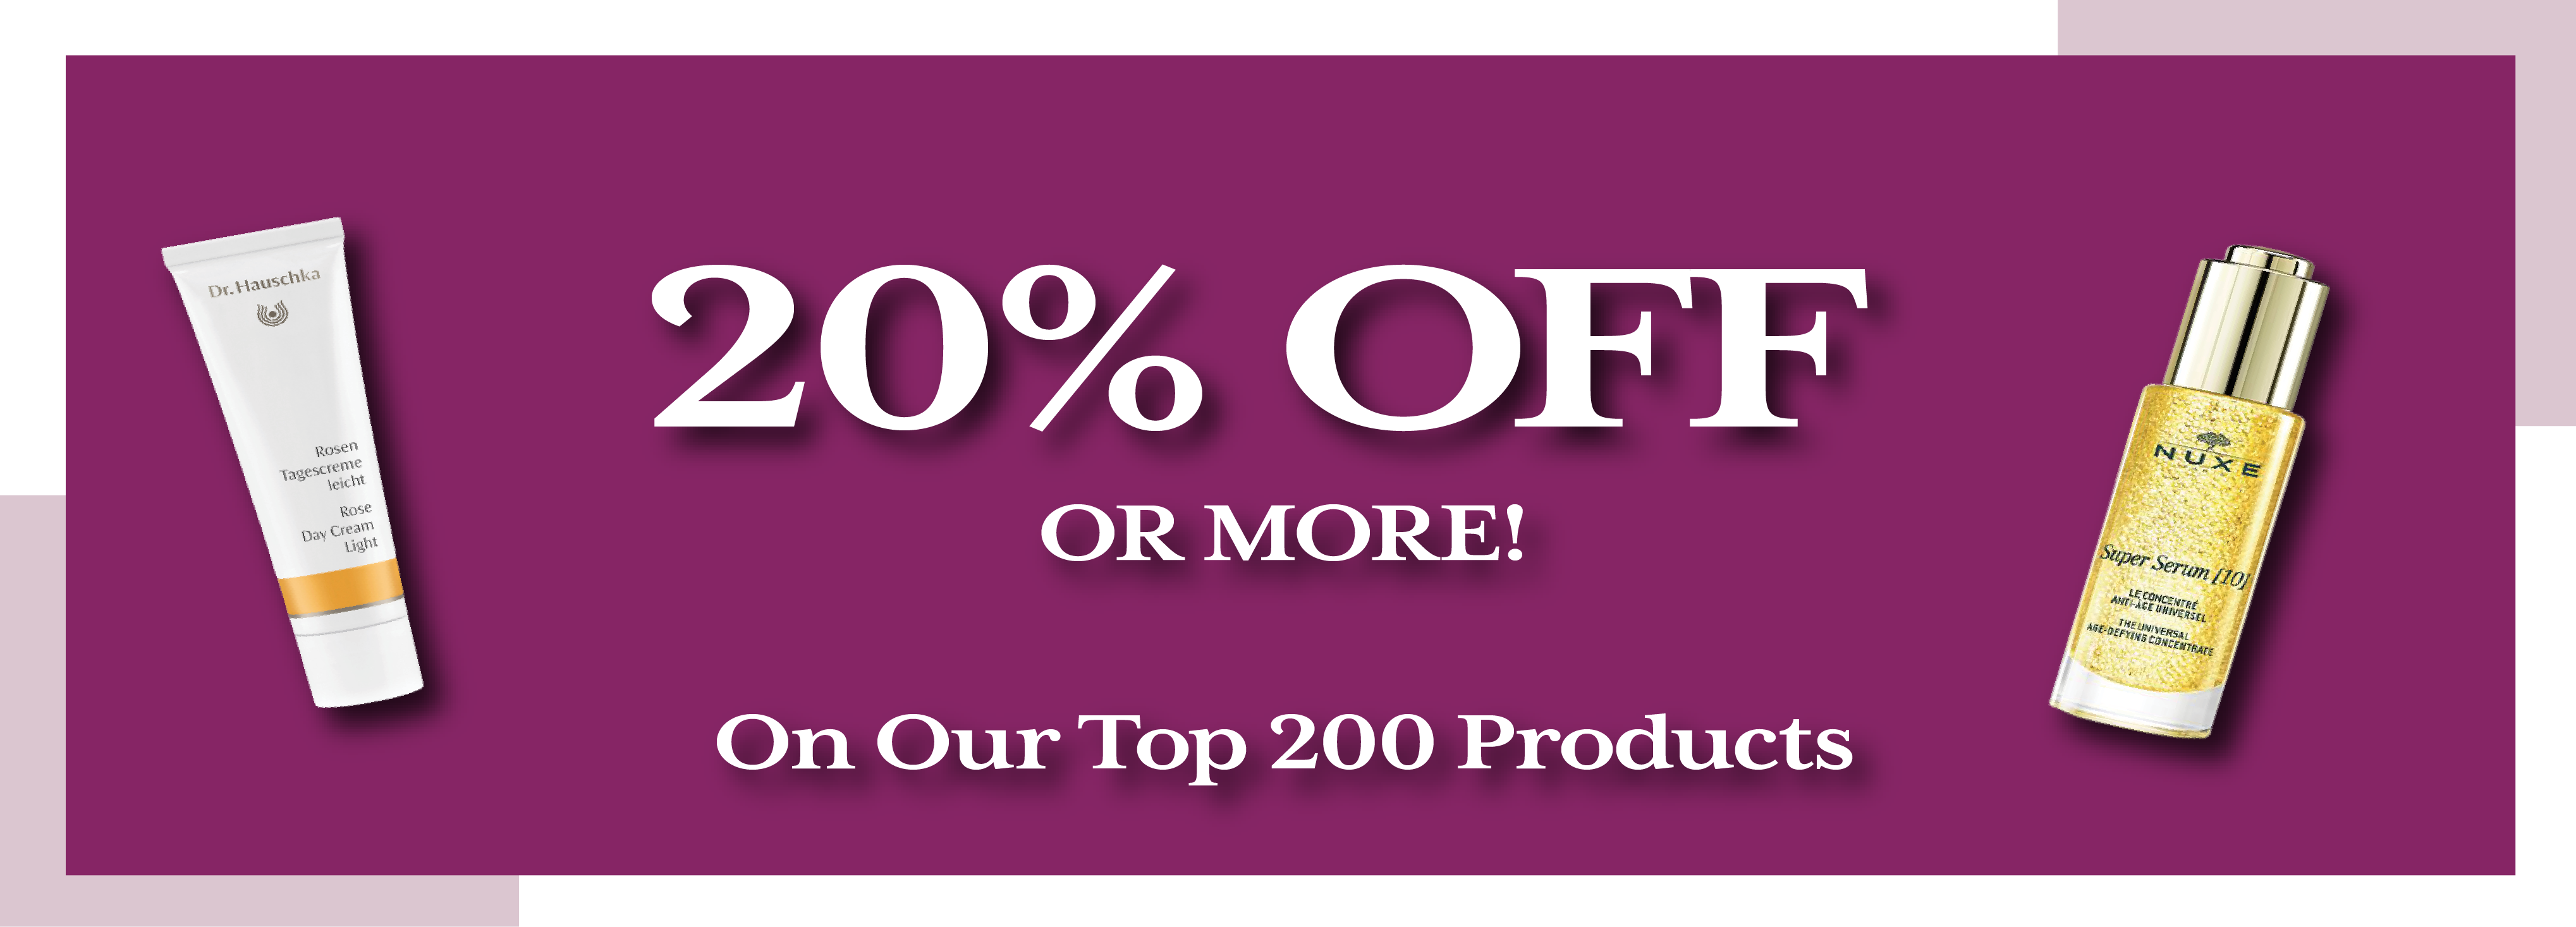 20% Off Top 200 Products